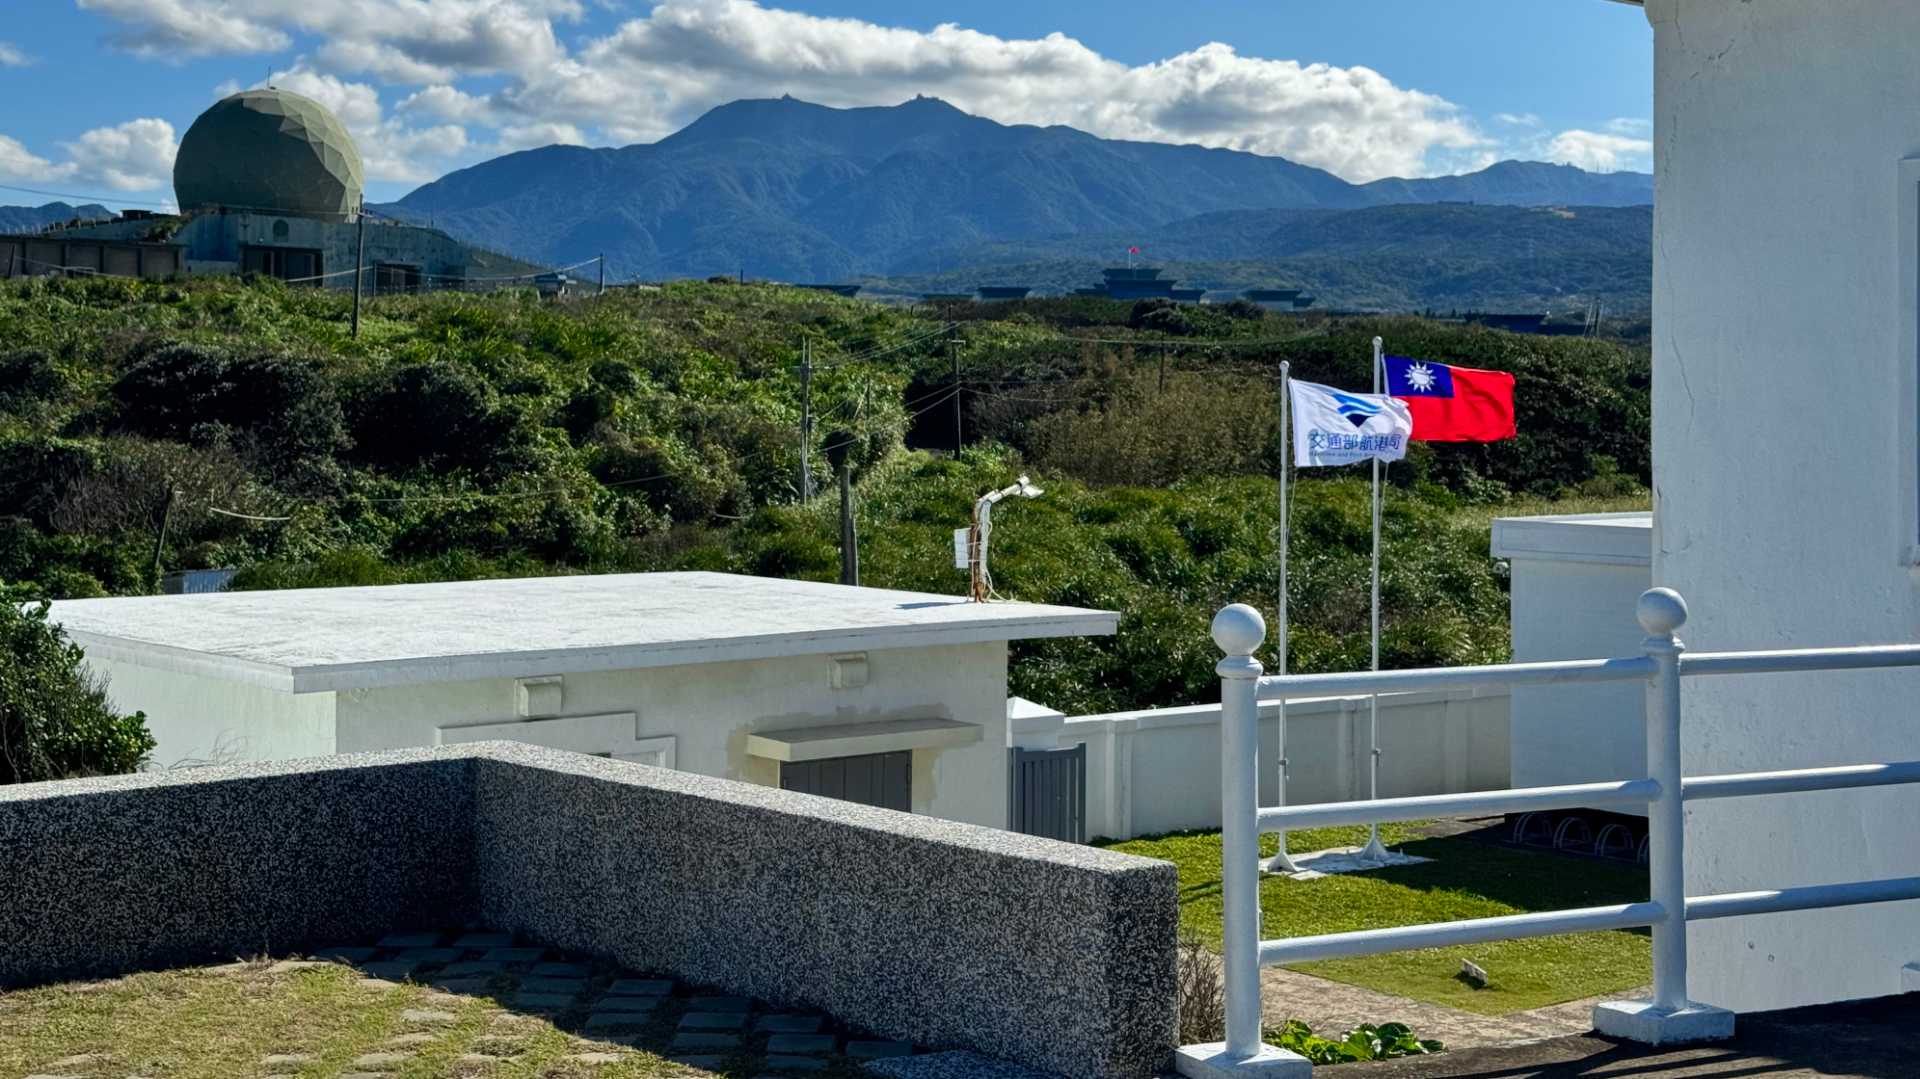 In the foreground, some white buildings and a Taiwan flag. Across vegetation in the distance is a radar dome and other military buildings.